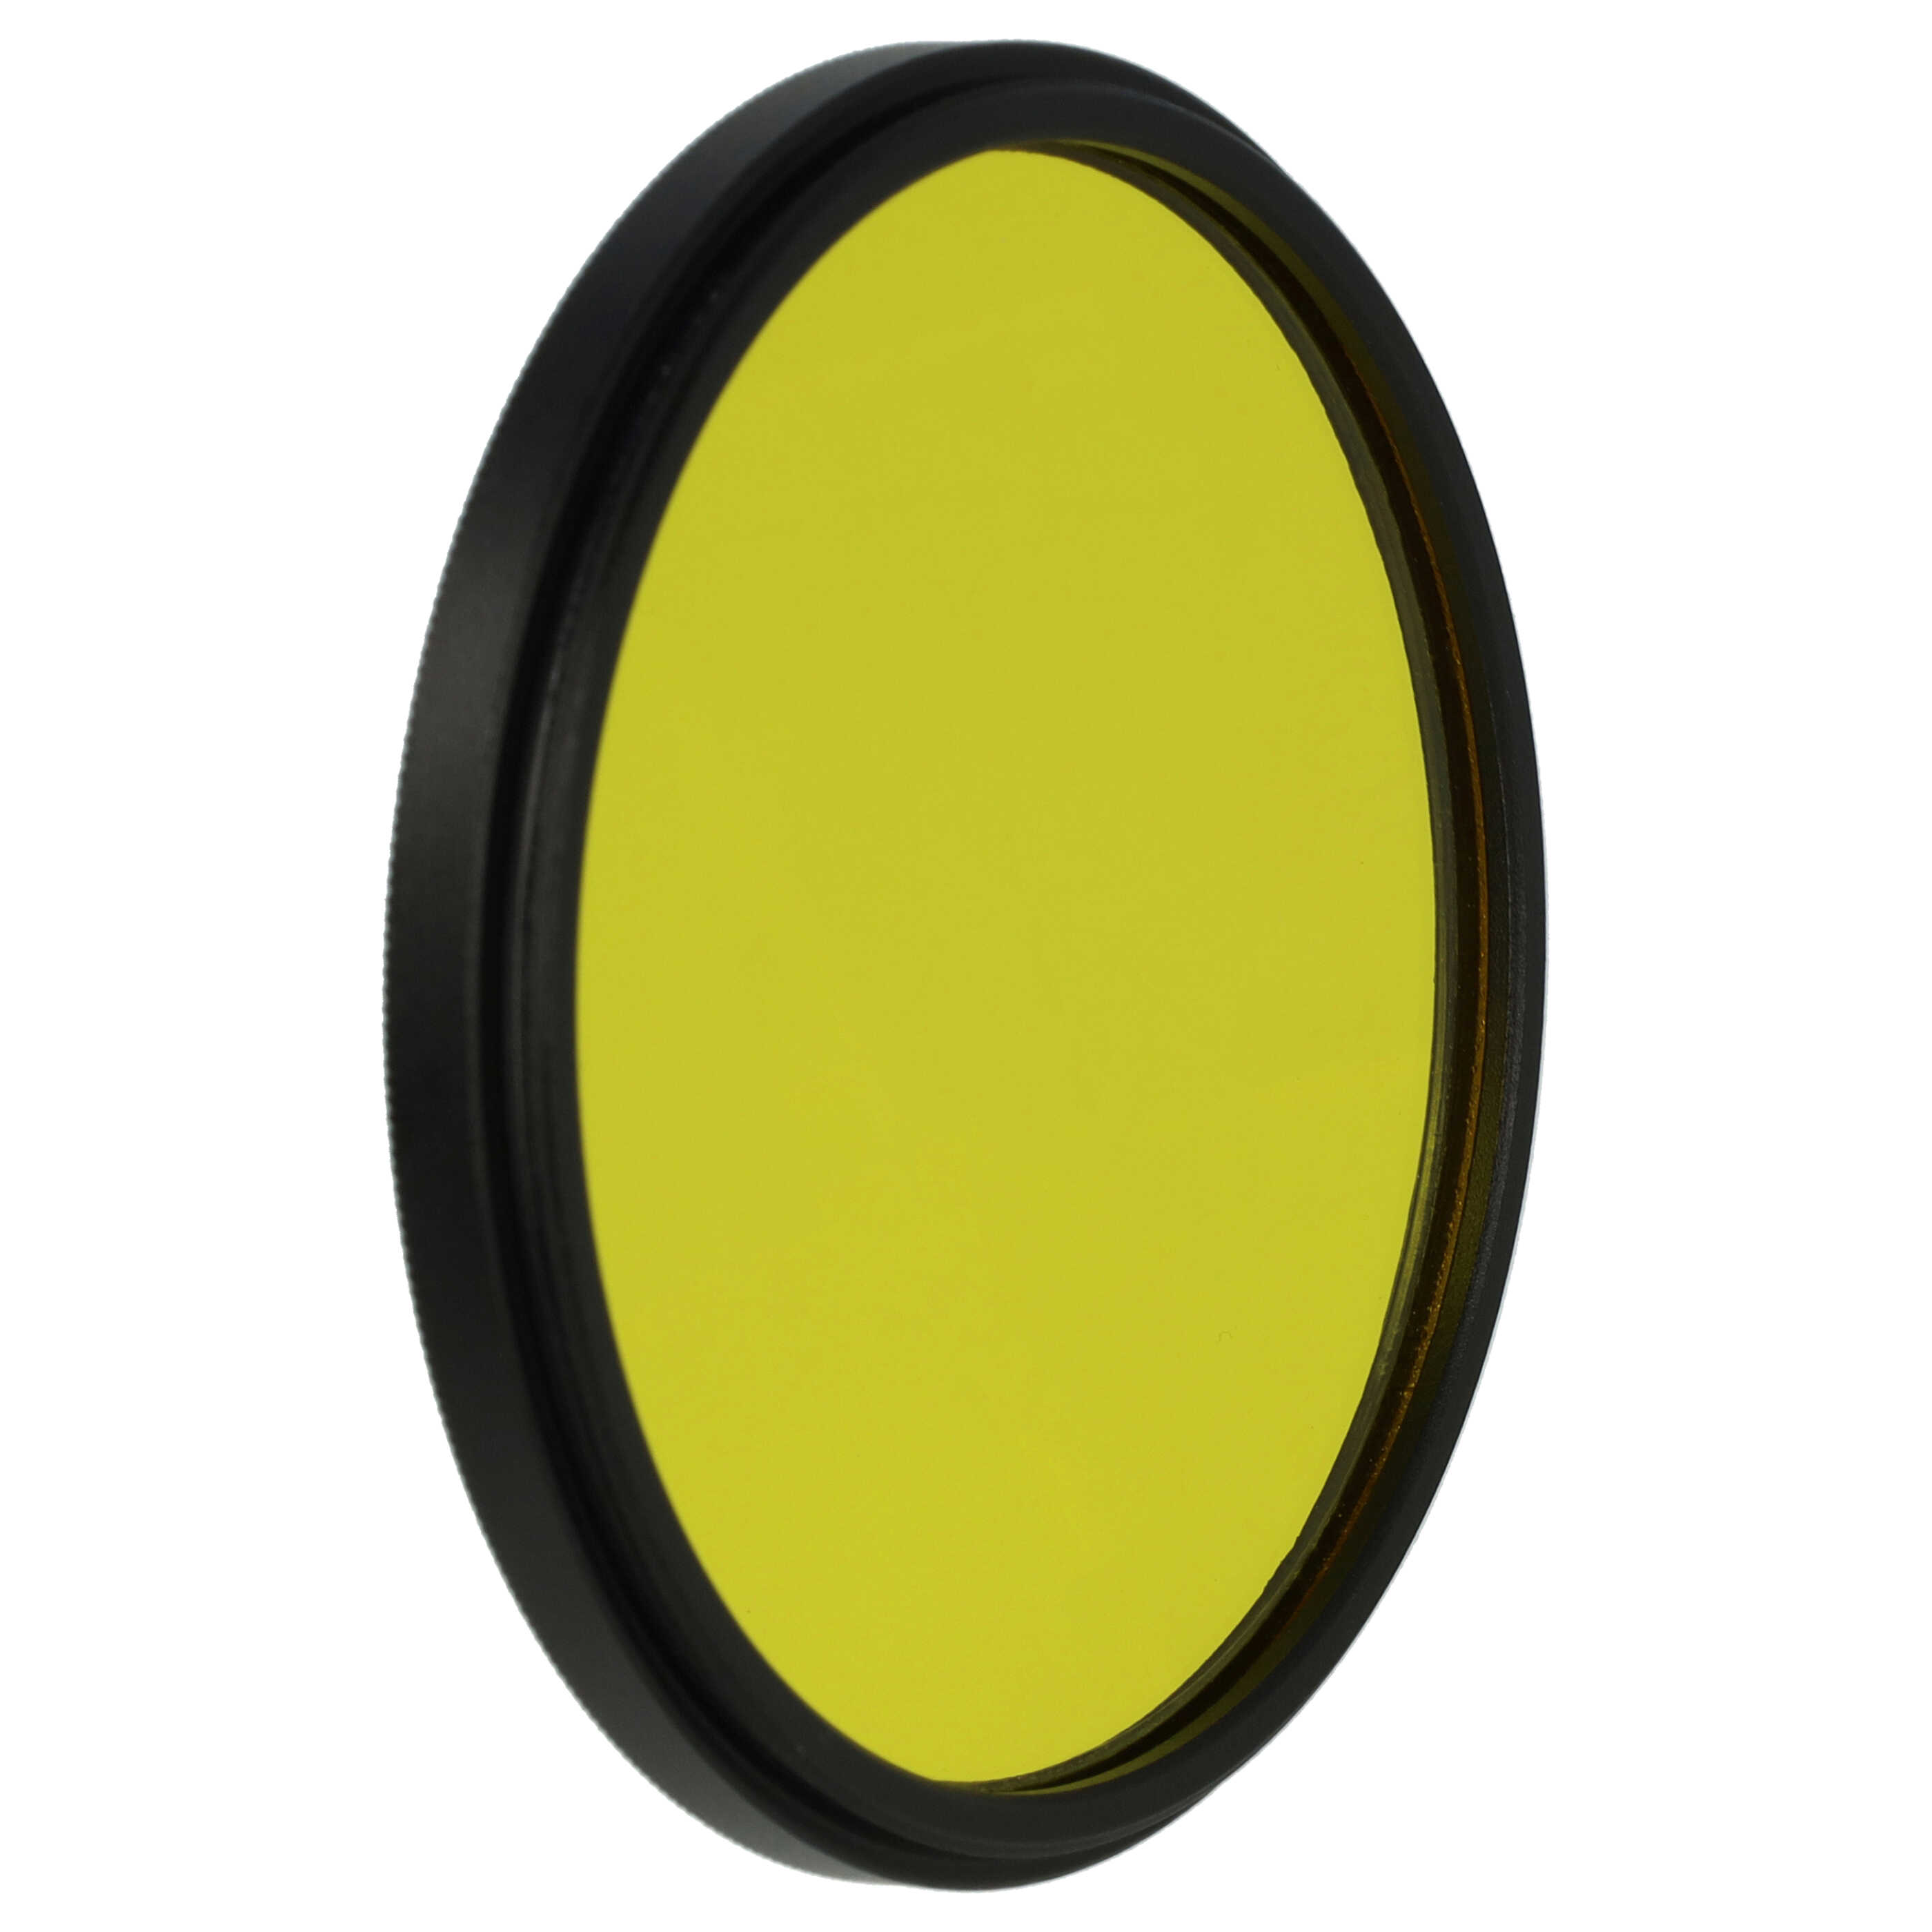 Coloured Filter, Yellow suitable for Camera Lenses with 62 mm Filter Thread - Yellow Filter